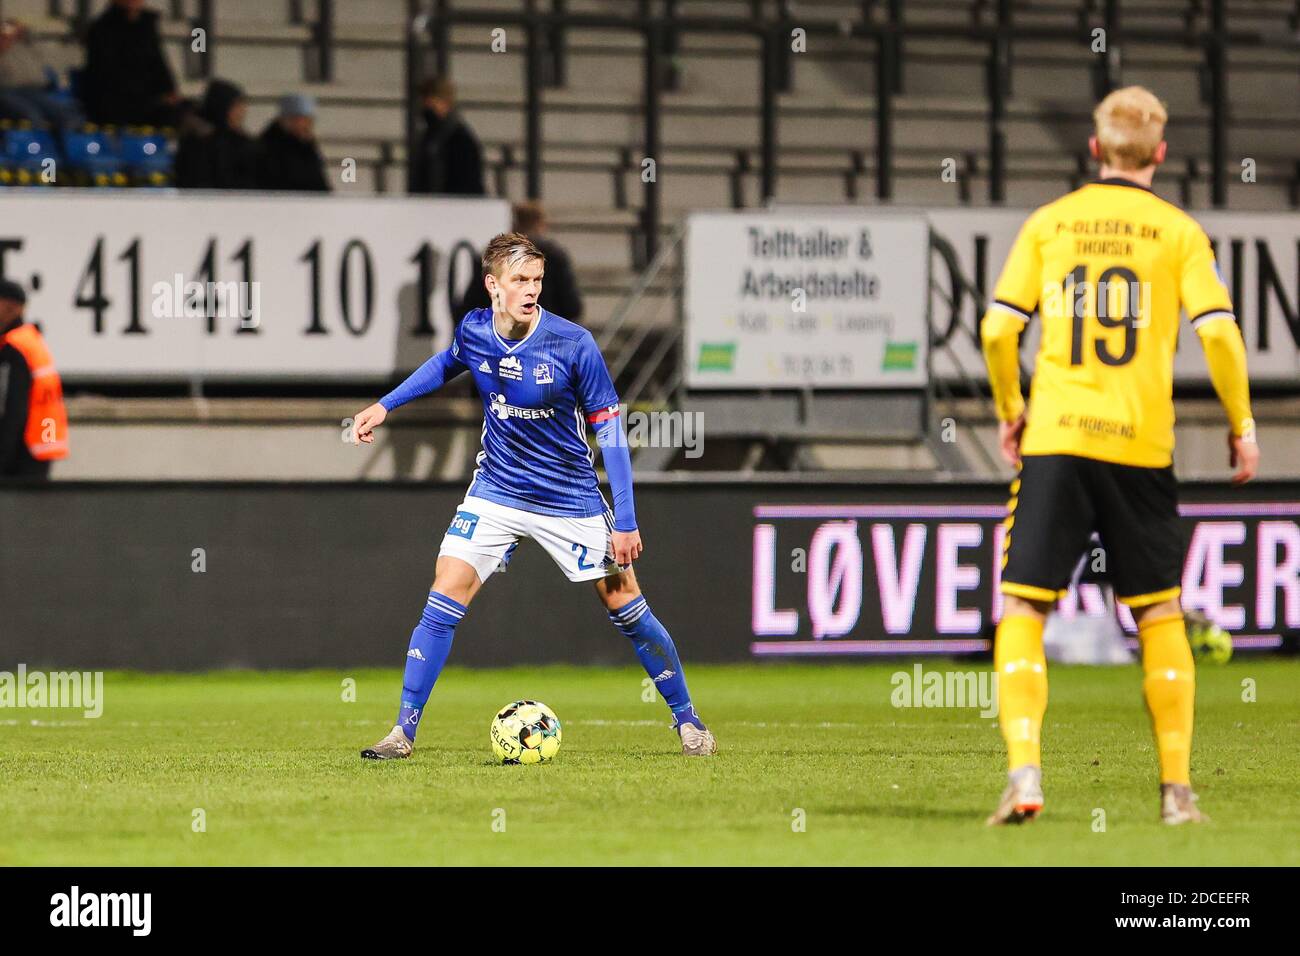 Lyngby bk v ac horsens hi-res stock photography and images - Alamy